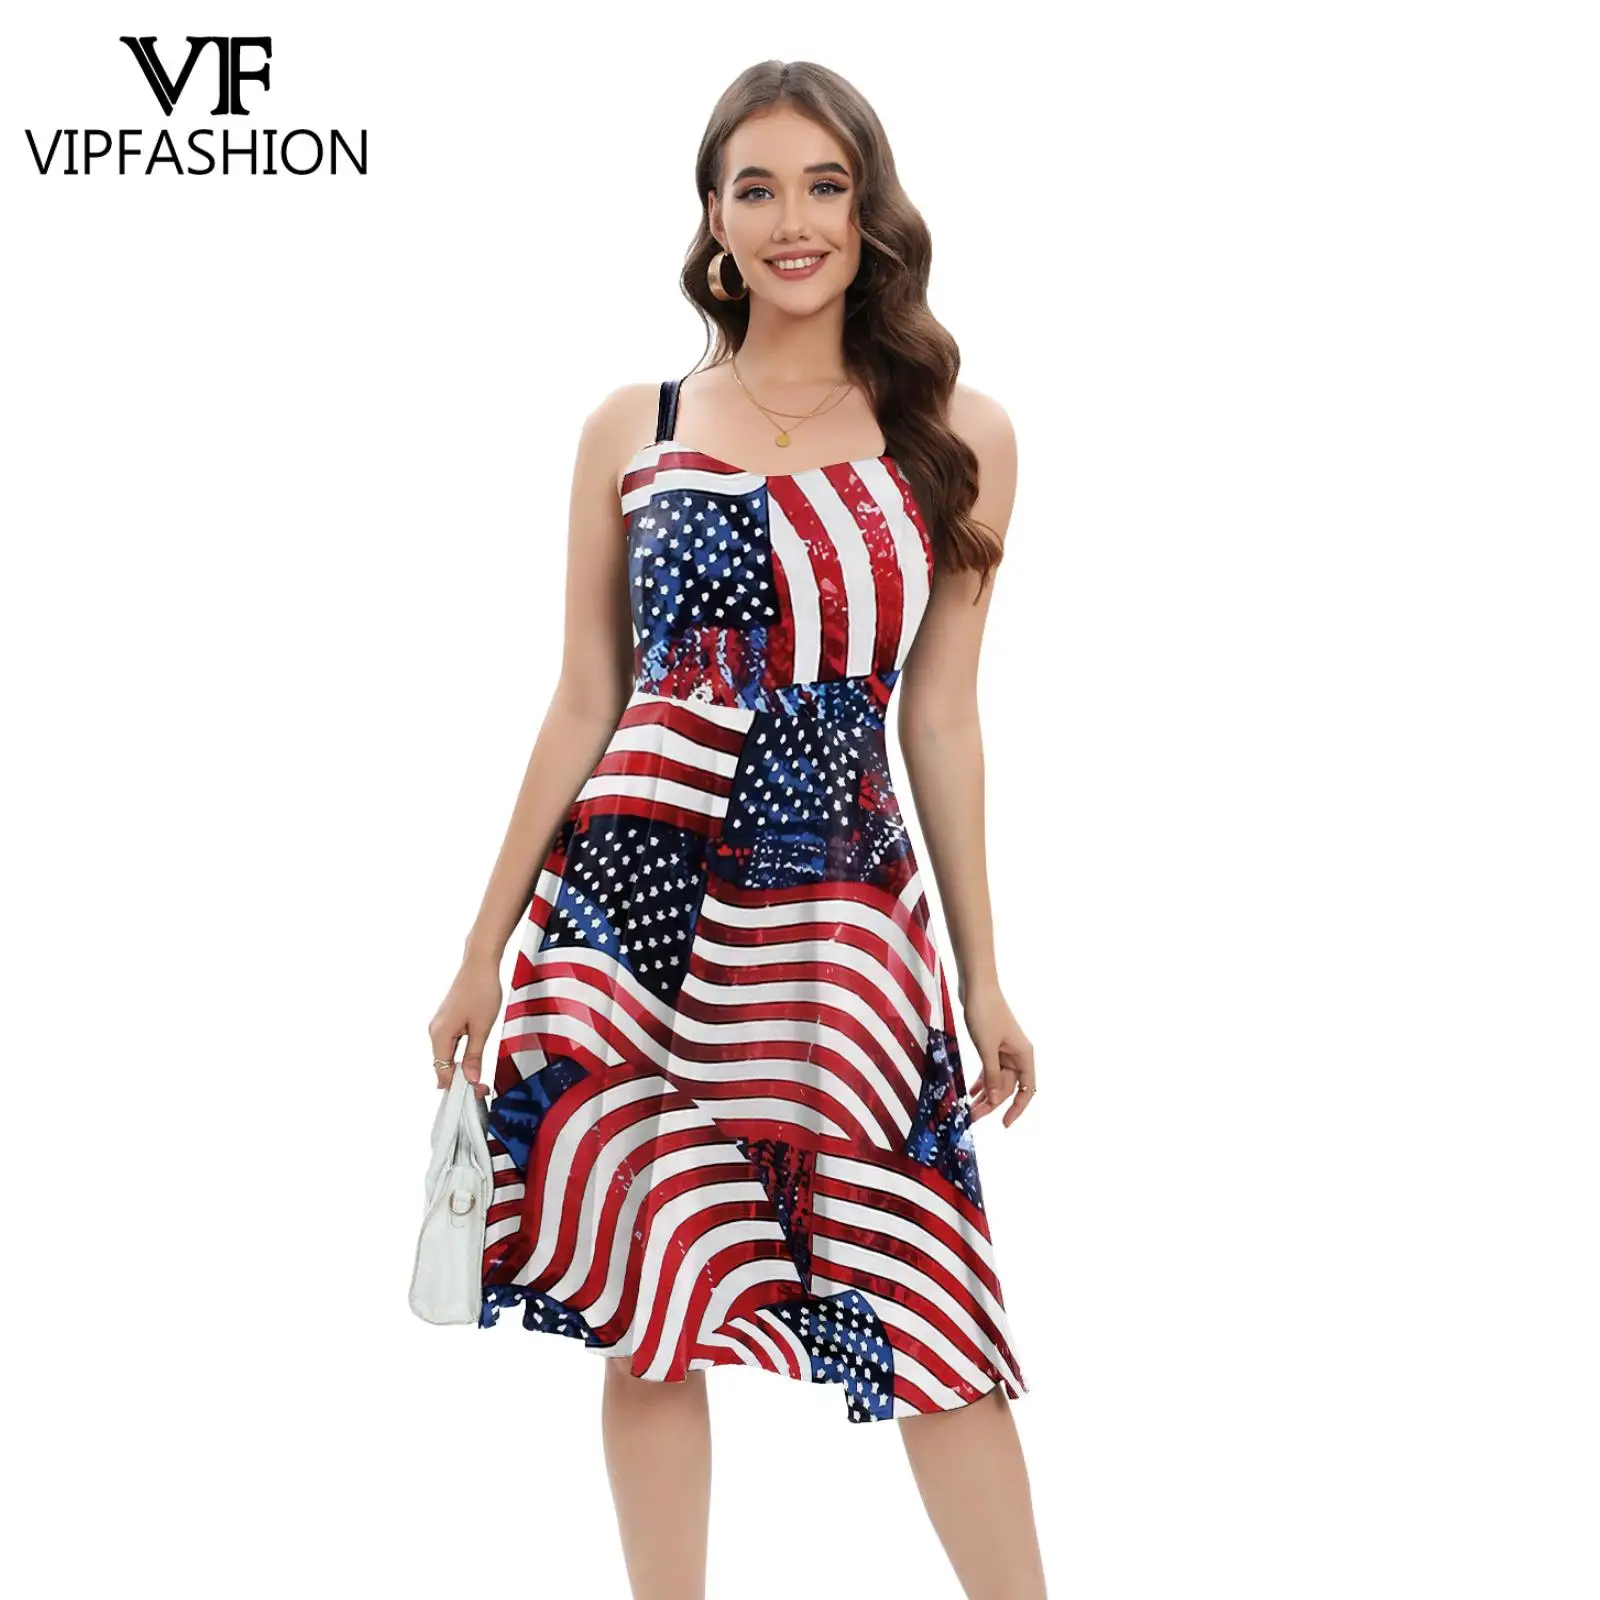 

VIPFASHION 4th of July Dress for Women USA Flag Printed Dress for Party Independence Day Cosplay Costume Summer Casual Clothes